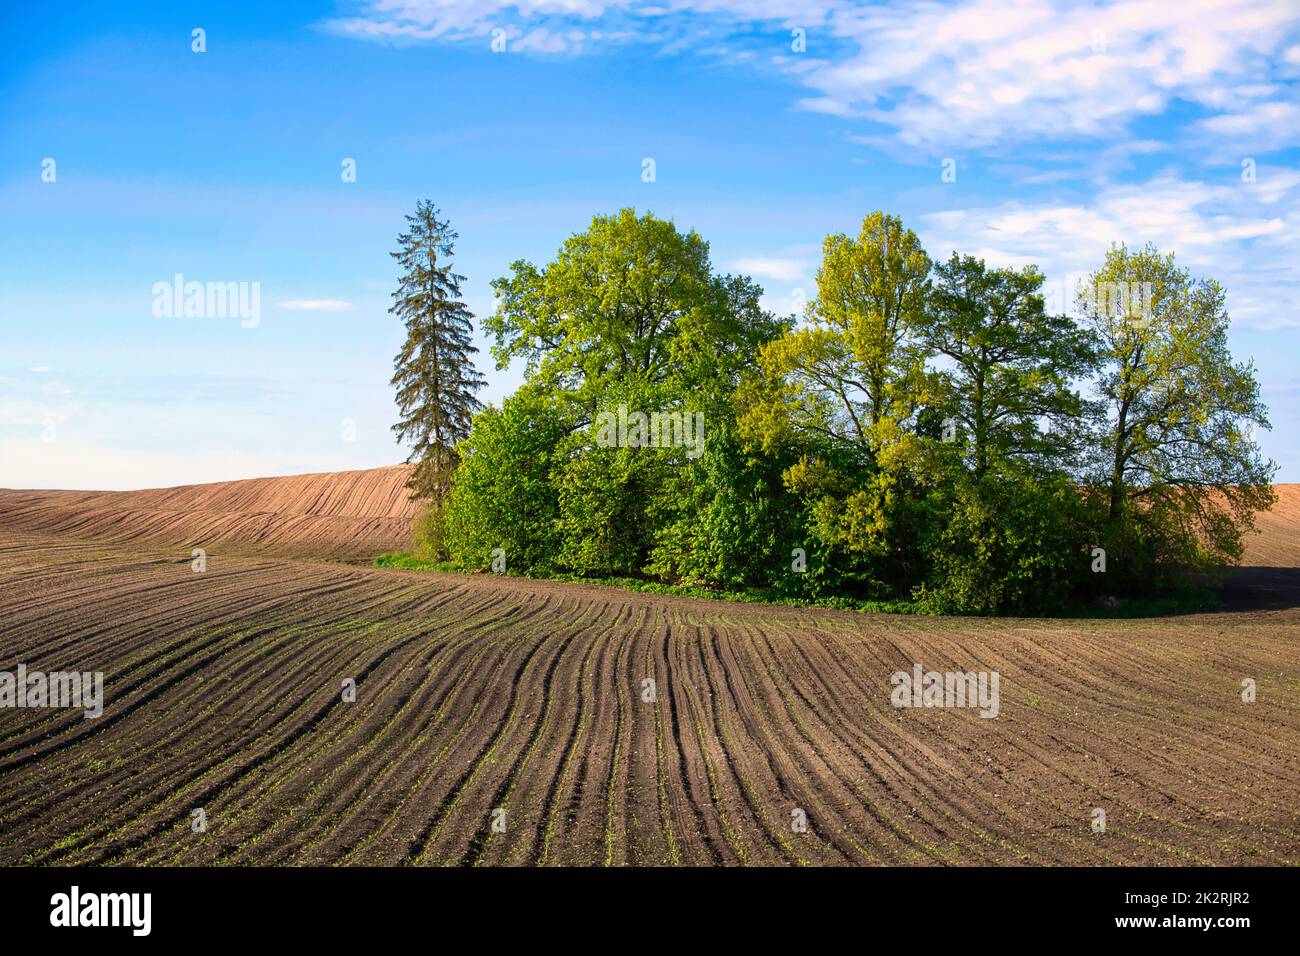 Newly planted spring crop in an agricultural field Stock Photo